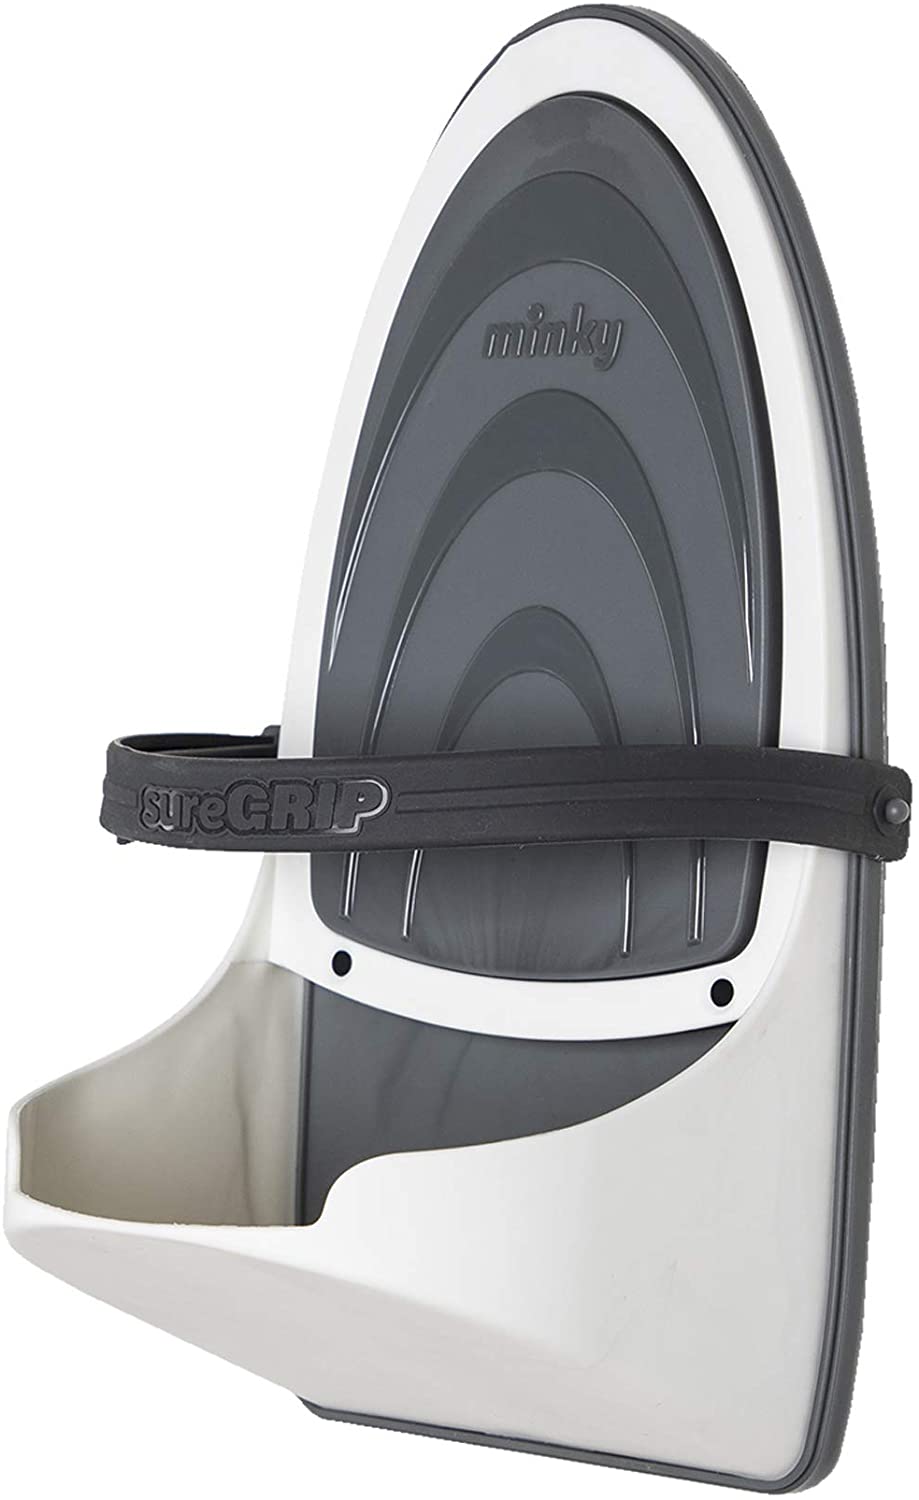 Minky-Sure-Grip-Iron-Holder-with-Strong-and-Secure-Strip-Grey-One-Size